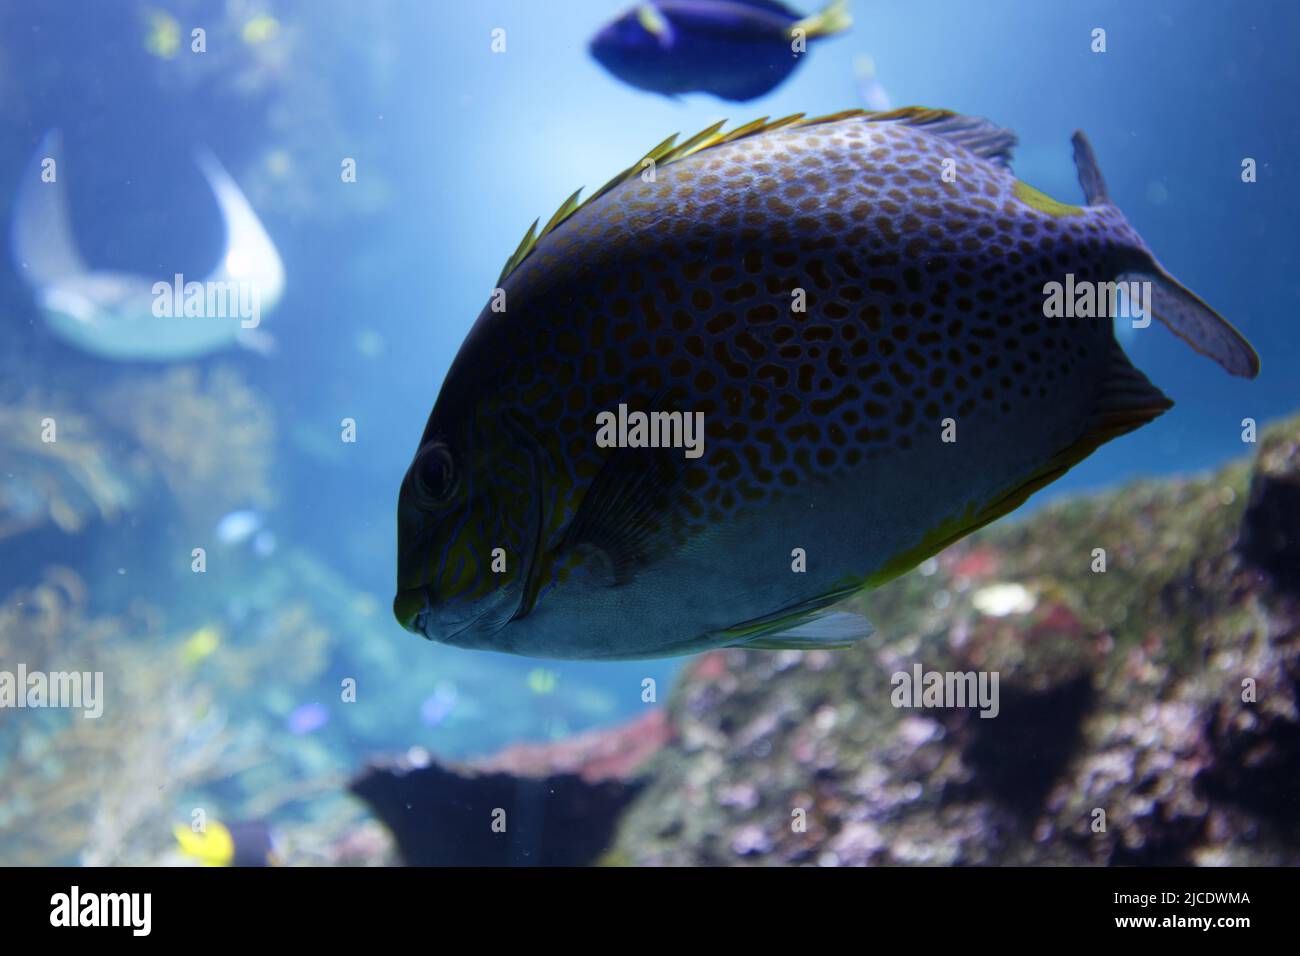 Giant grouper or brown spotted grouper fish swimming under green sea water . Stock Photo